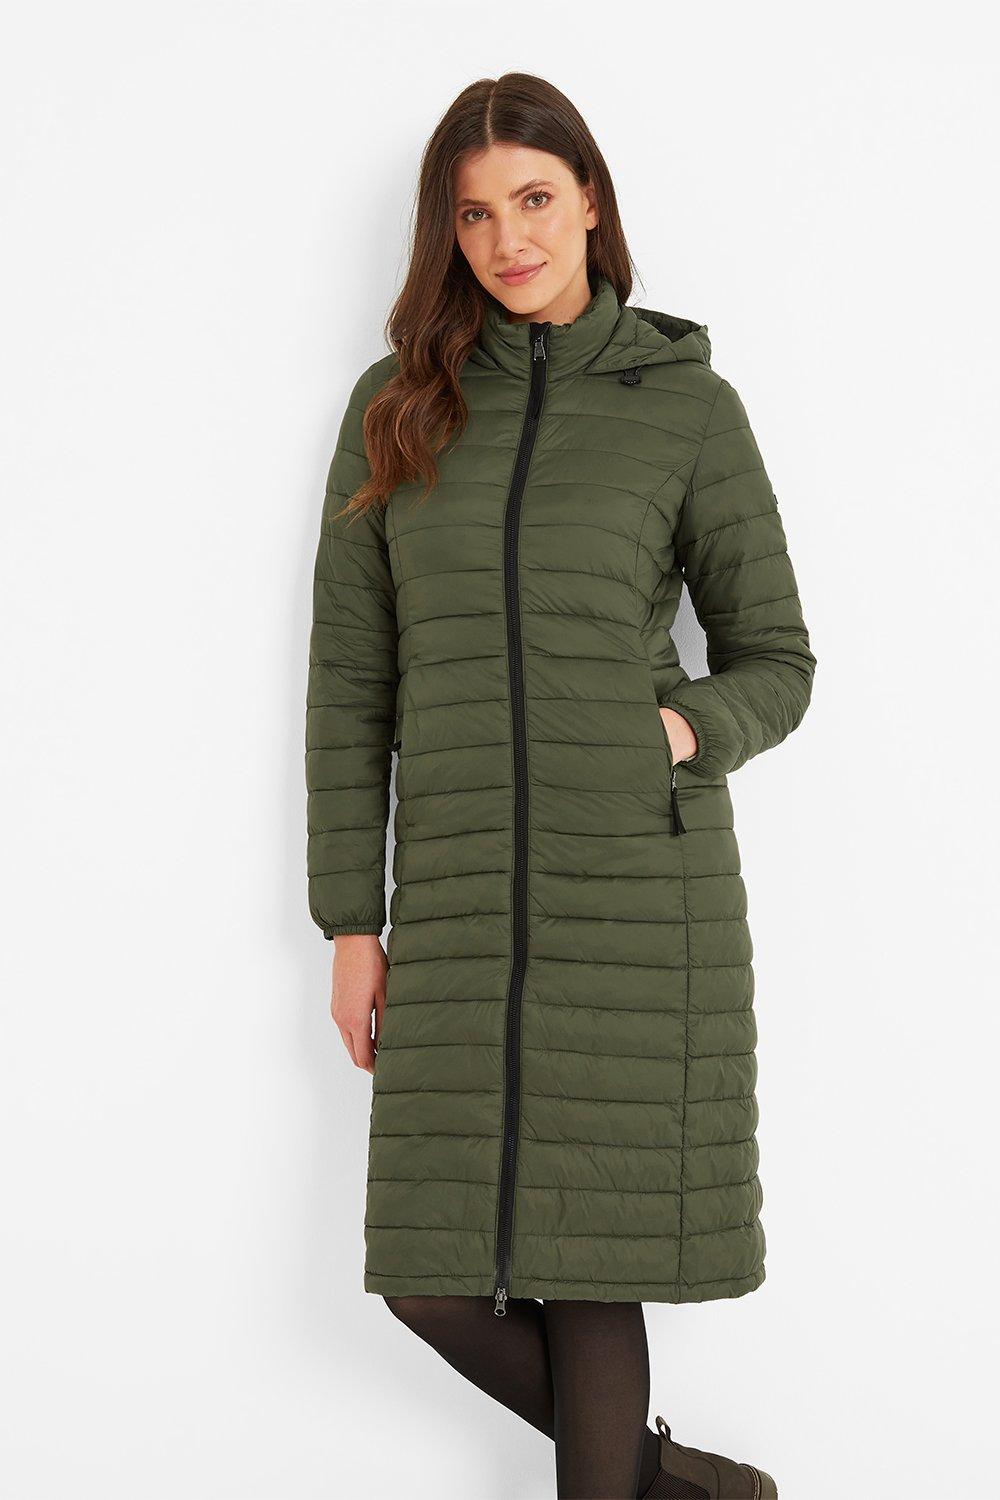 Coach Outlet Lightweight Quilted Jacket - Green